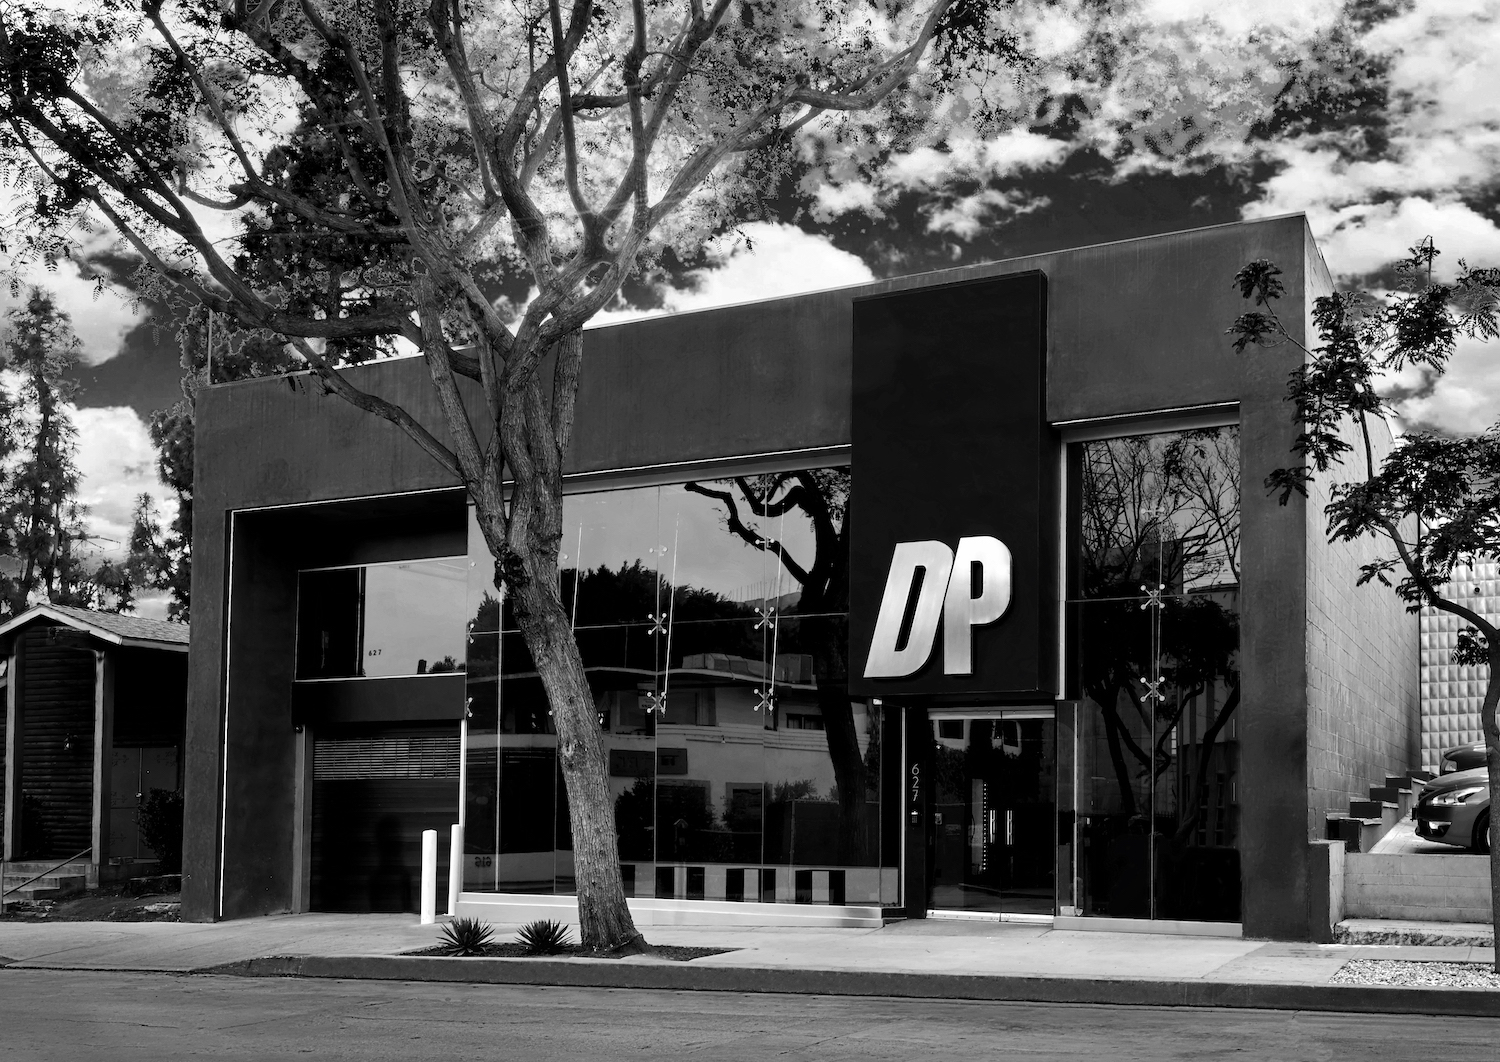 Exterior of Dogpound gym photographed in black and white 